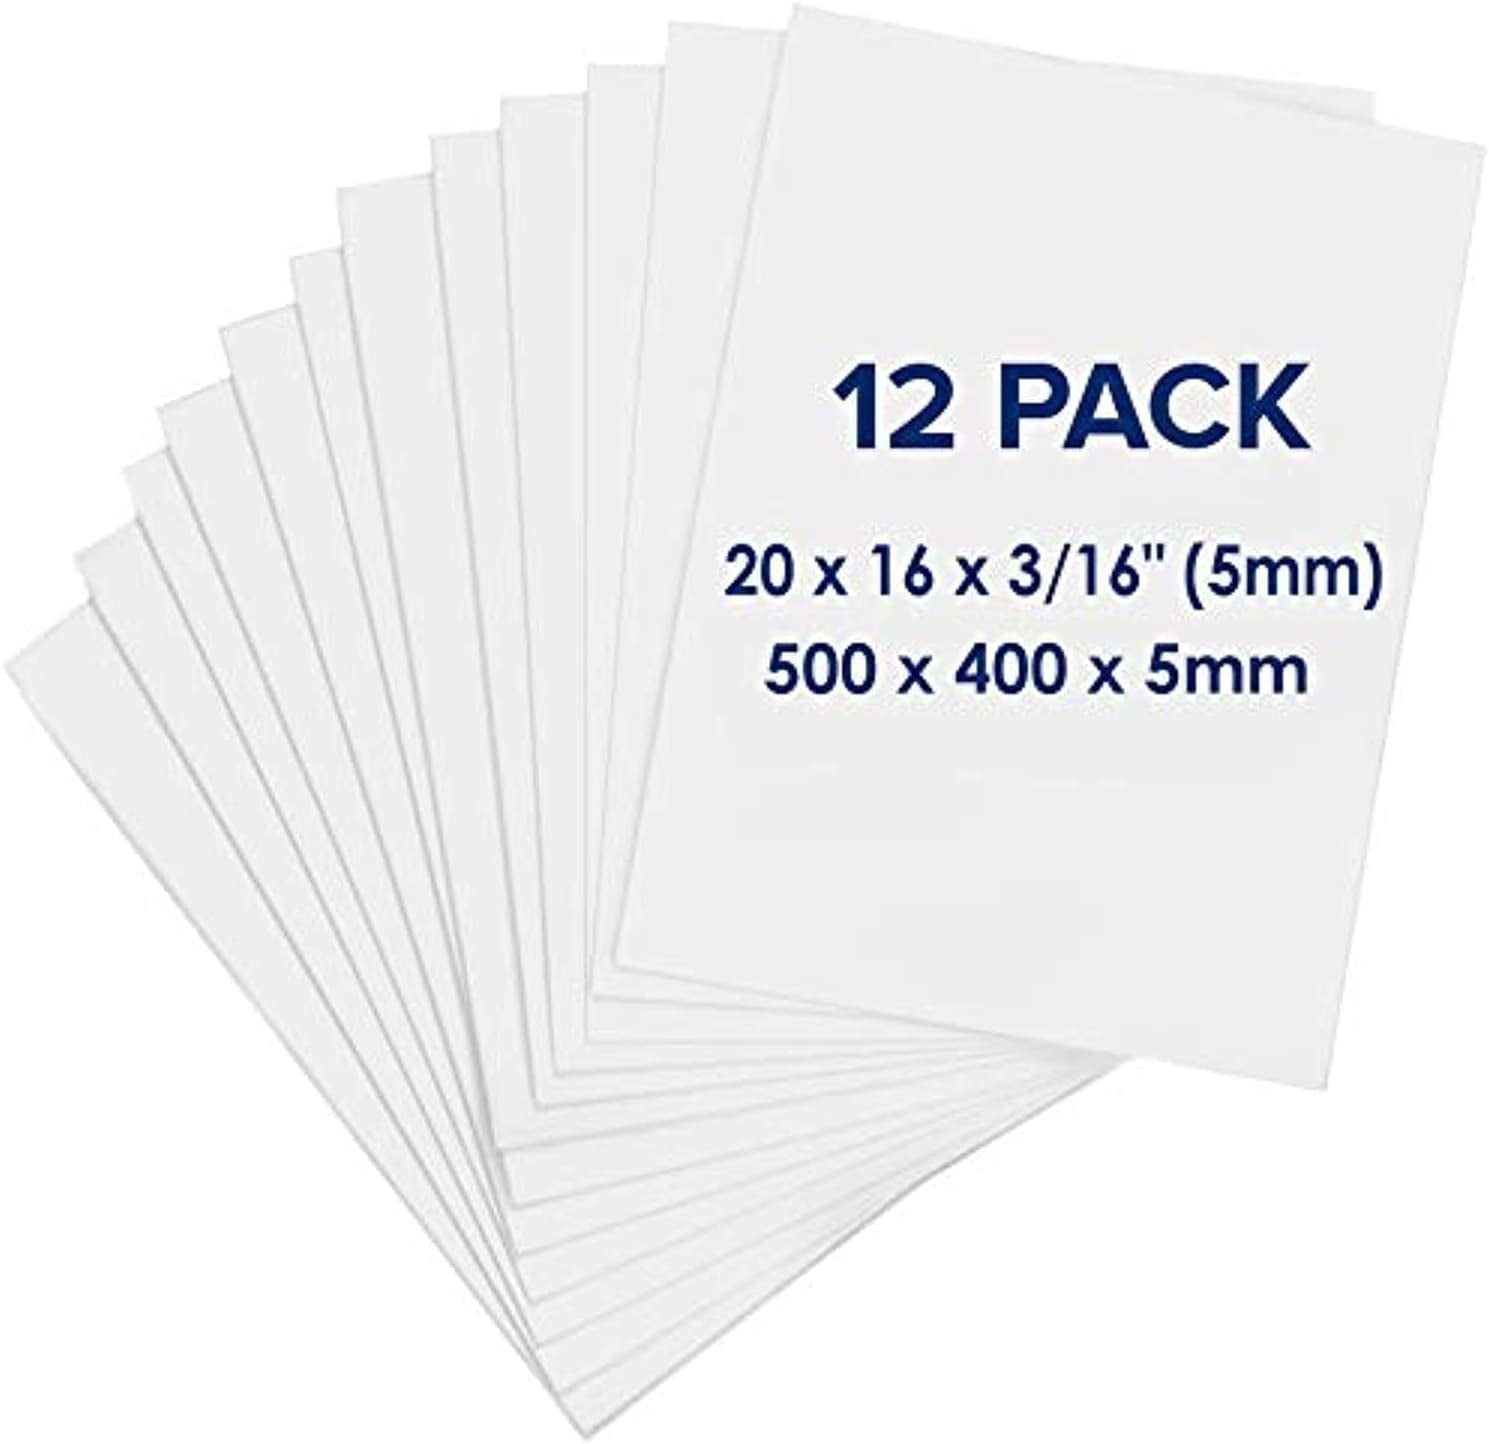 MIVIDE 20 Pack 11x14 inch Black Foam Boards, Foam Core Backing Boards 3/16 inch Thick Double